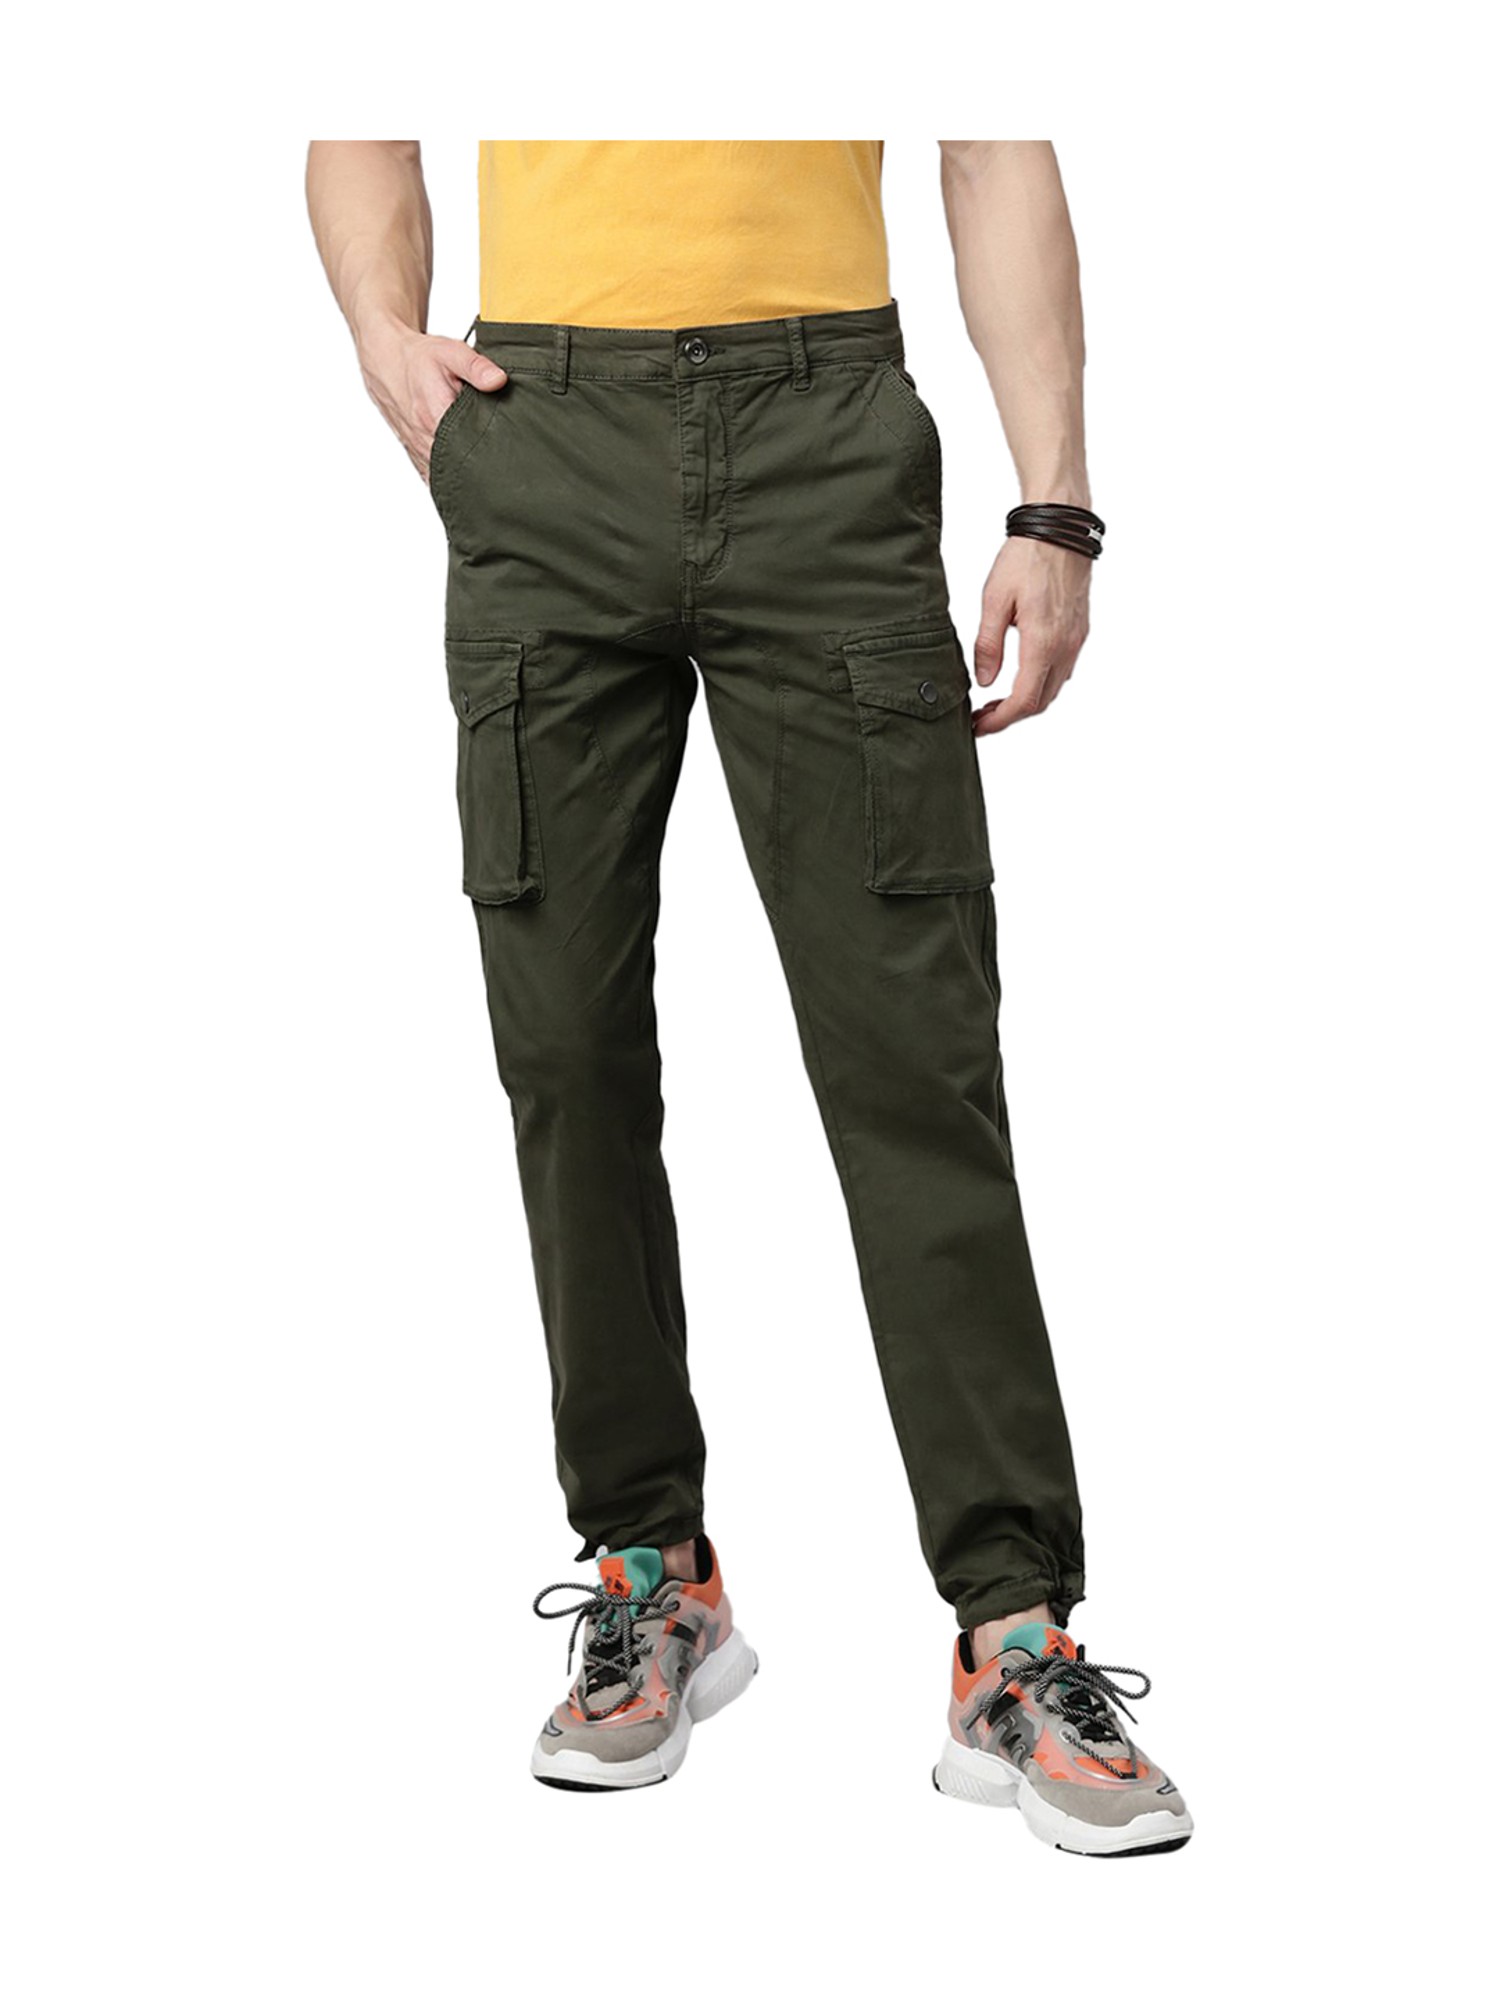 Dark Green Pants Outfits For Men 1200 ideas  outfits  Lookastic